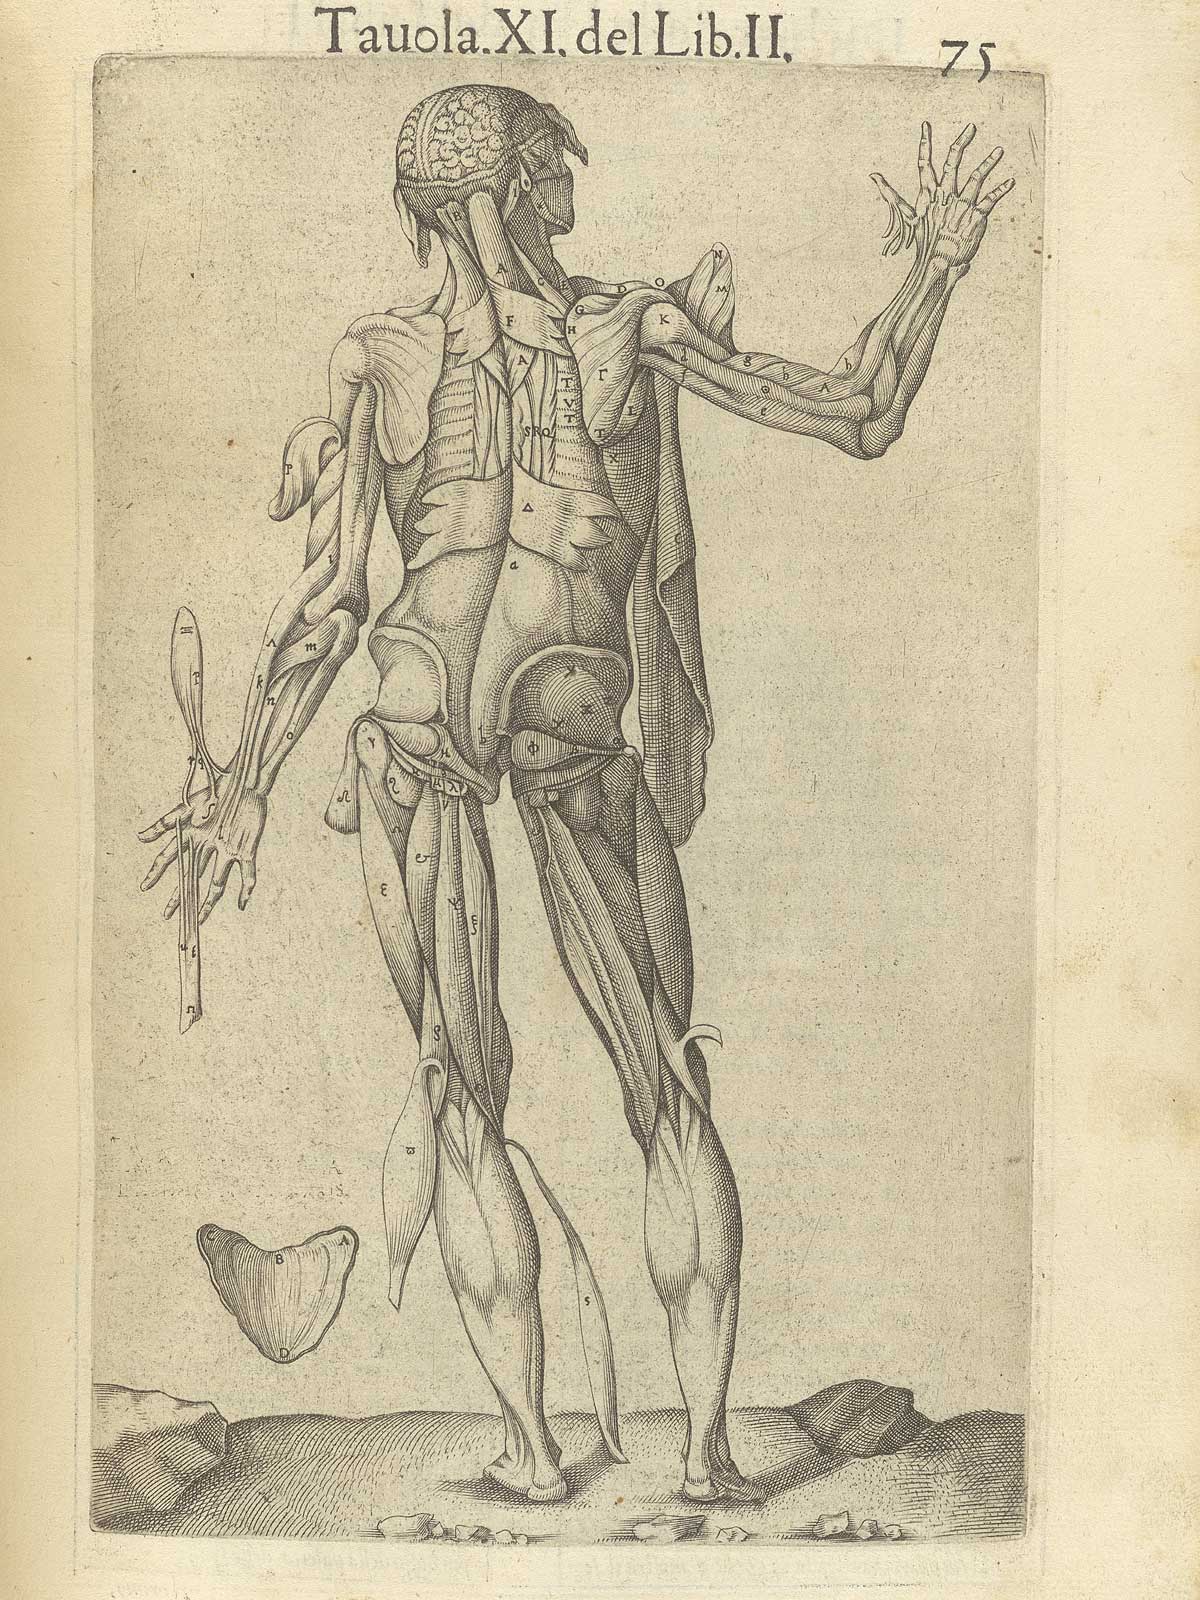 Page 75 of Juan Valverde de Amusco's Anatomia del corpo humano, featuring the backside of a flayed cadaver with flaps of muscle in the arms, hands and legs fanned away to reveal muscles underneath them.